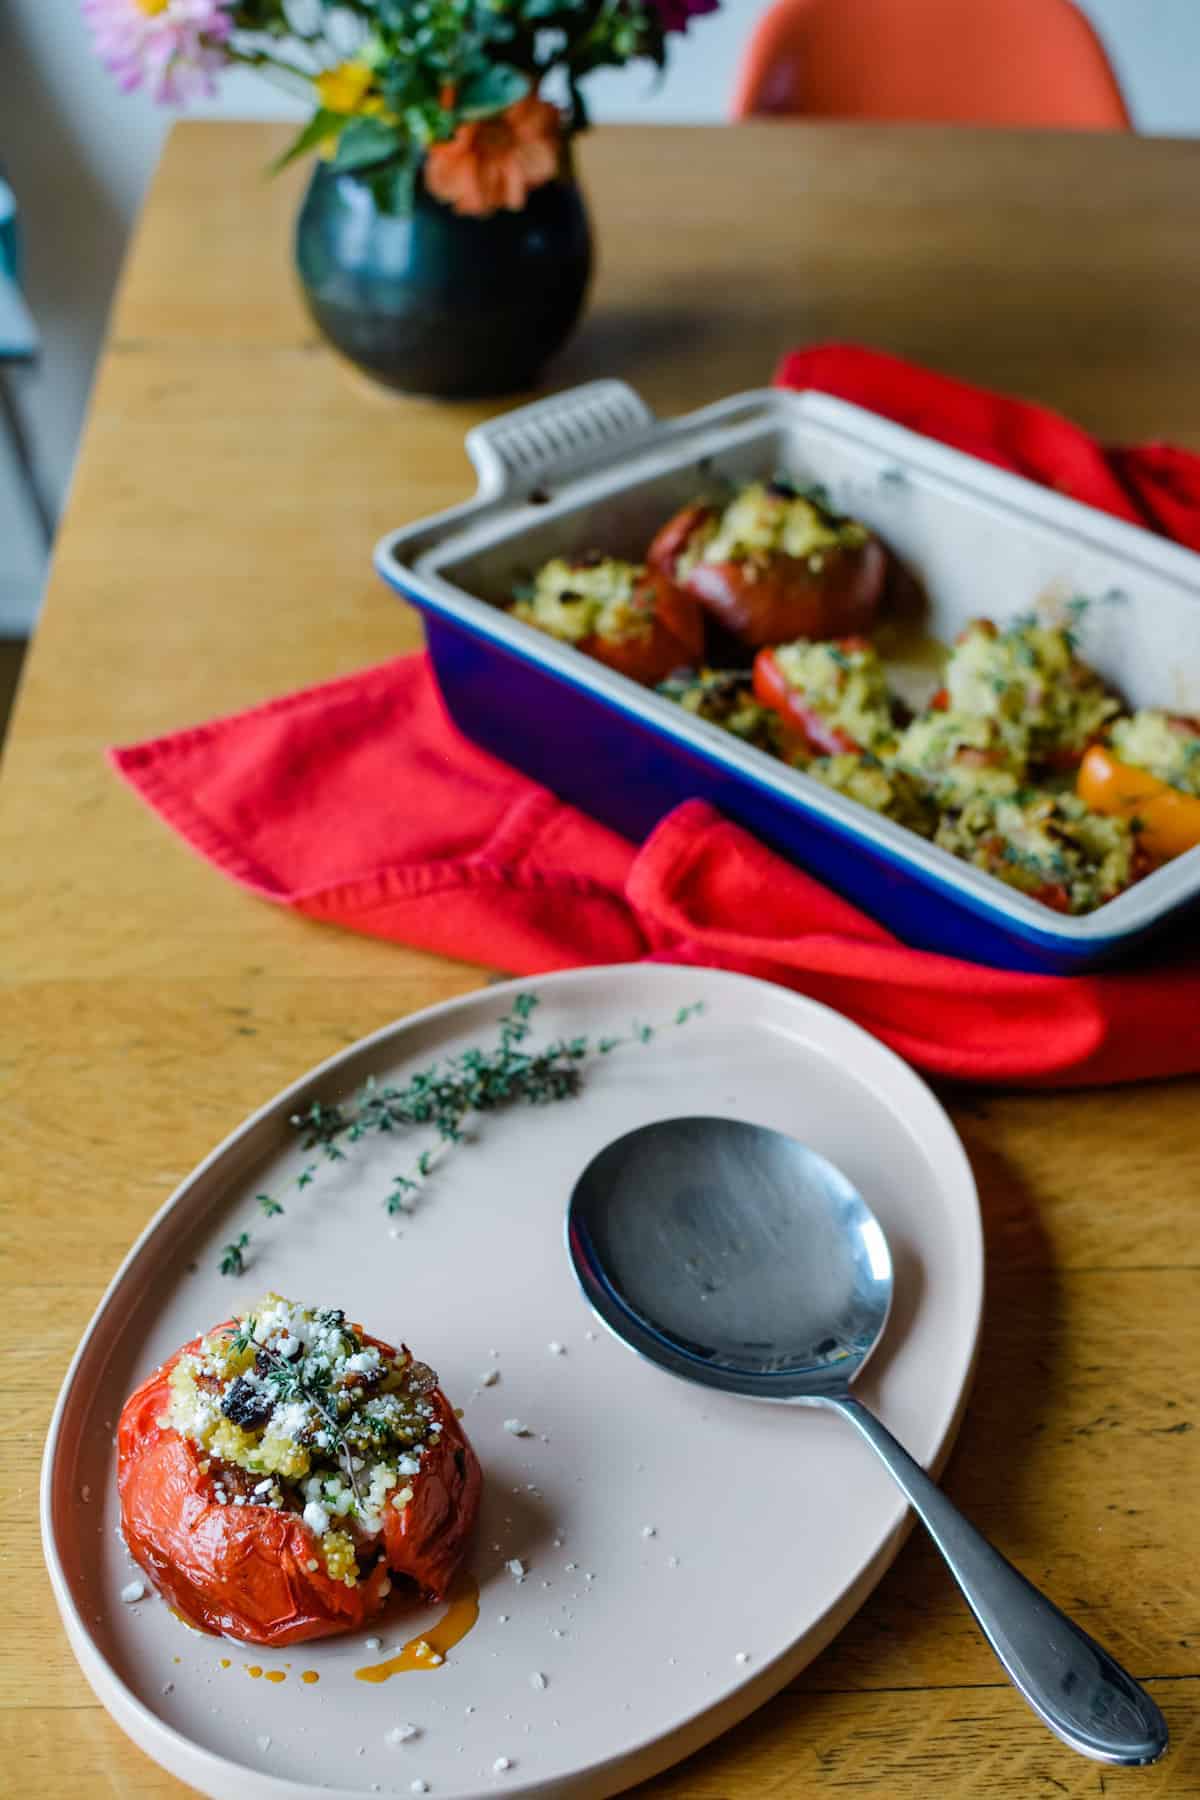 These Orzo and Ham Stuffed Vegetables are a favorite summertime side dish to go with Mexican carne asada, grilled fish, or as a dinner on thier own!